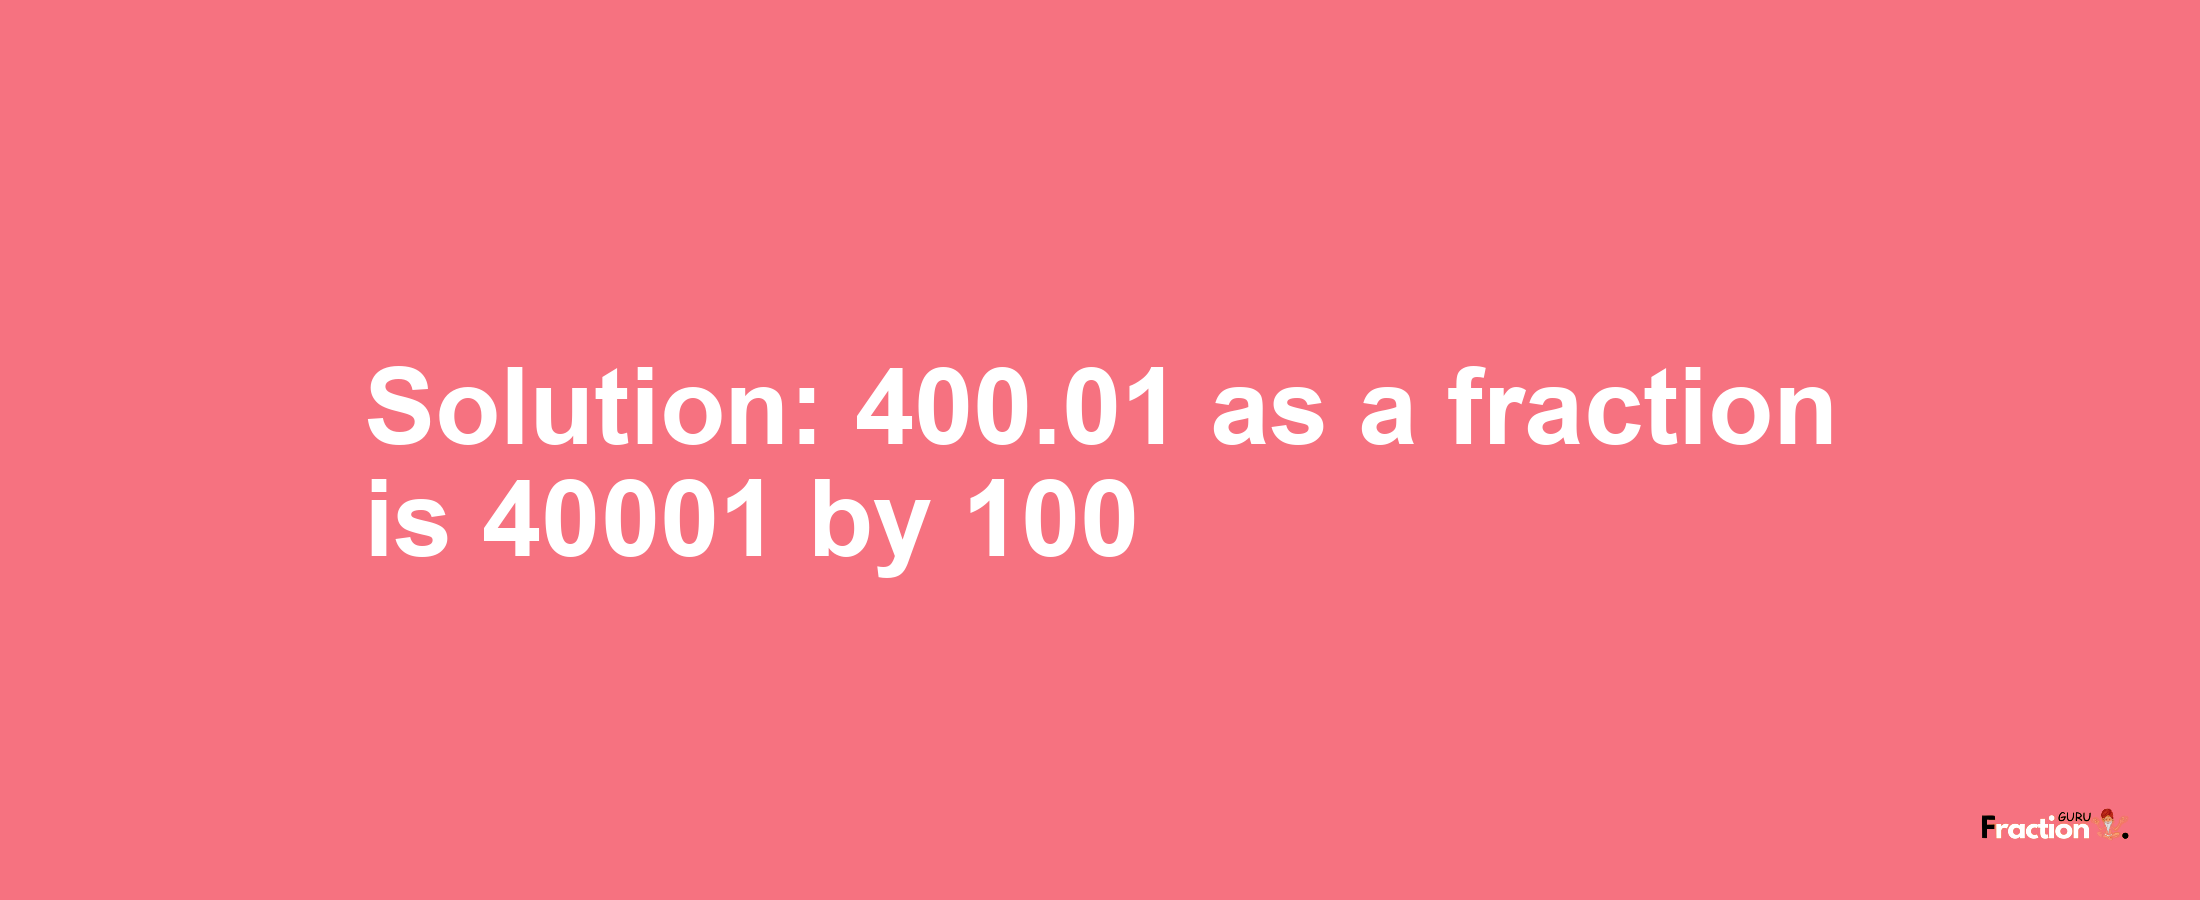 Solution:400.01 as a fraction is 40001/100